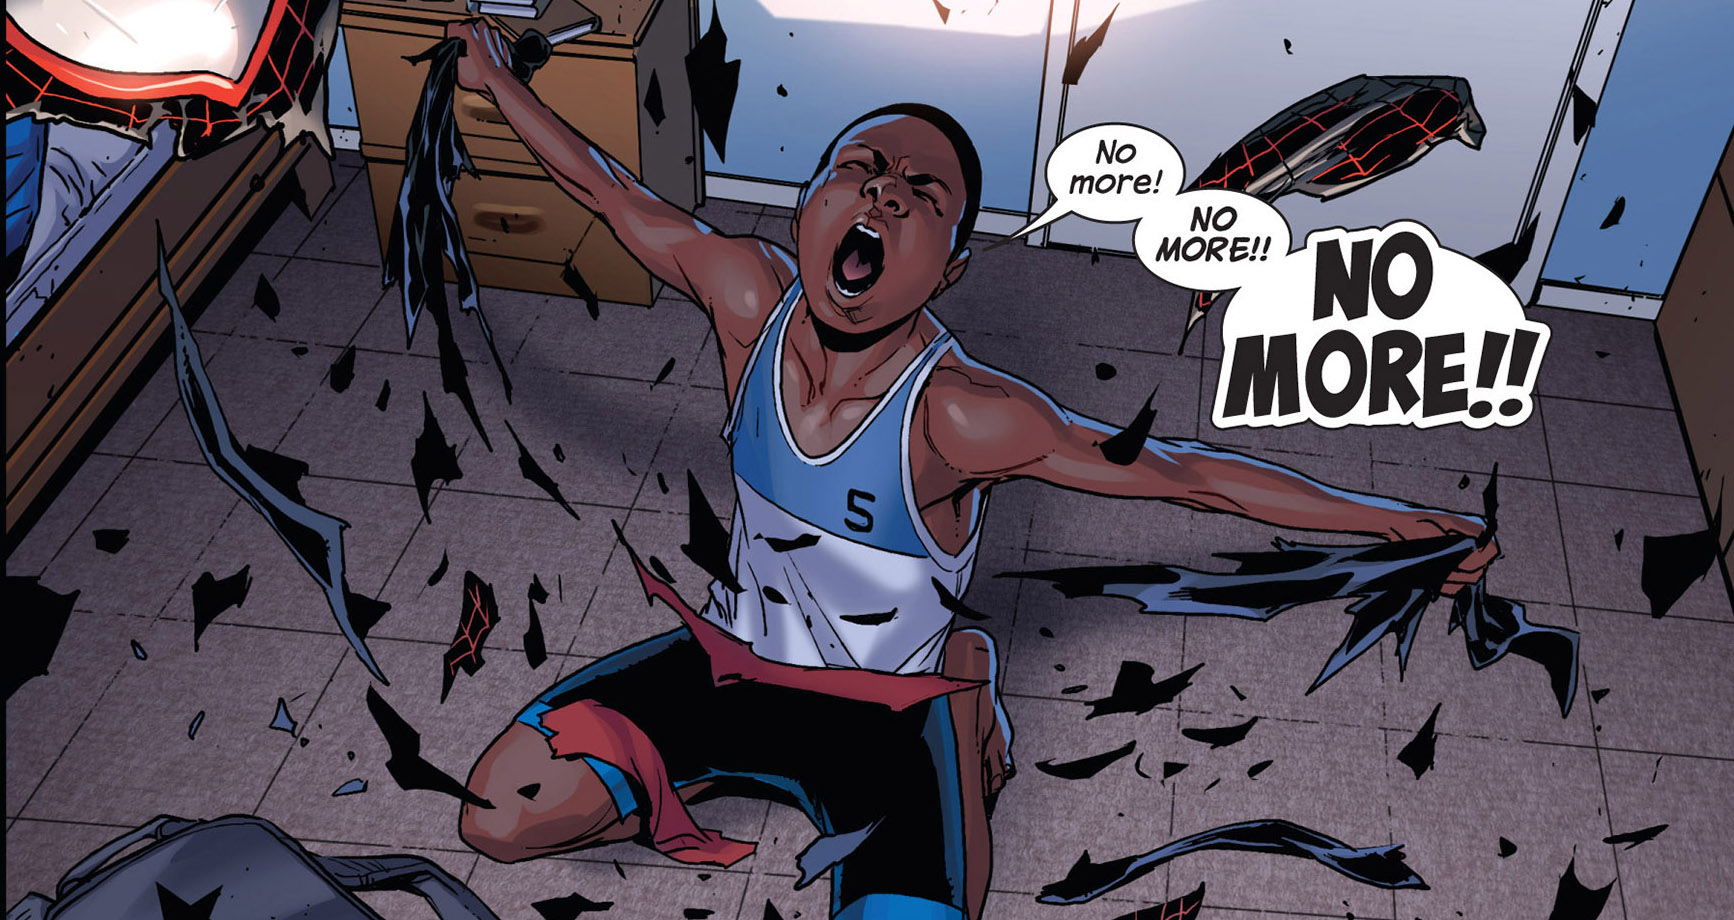 Once again Peter just can't catch a break (Miles Morales: Spider